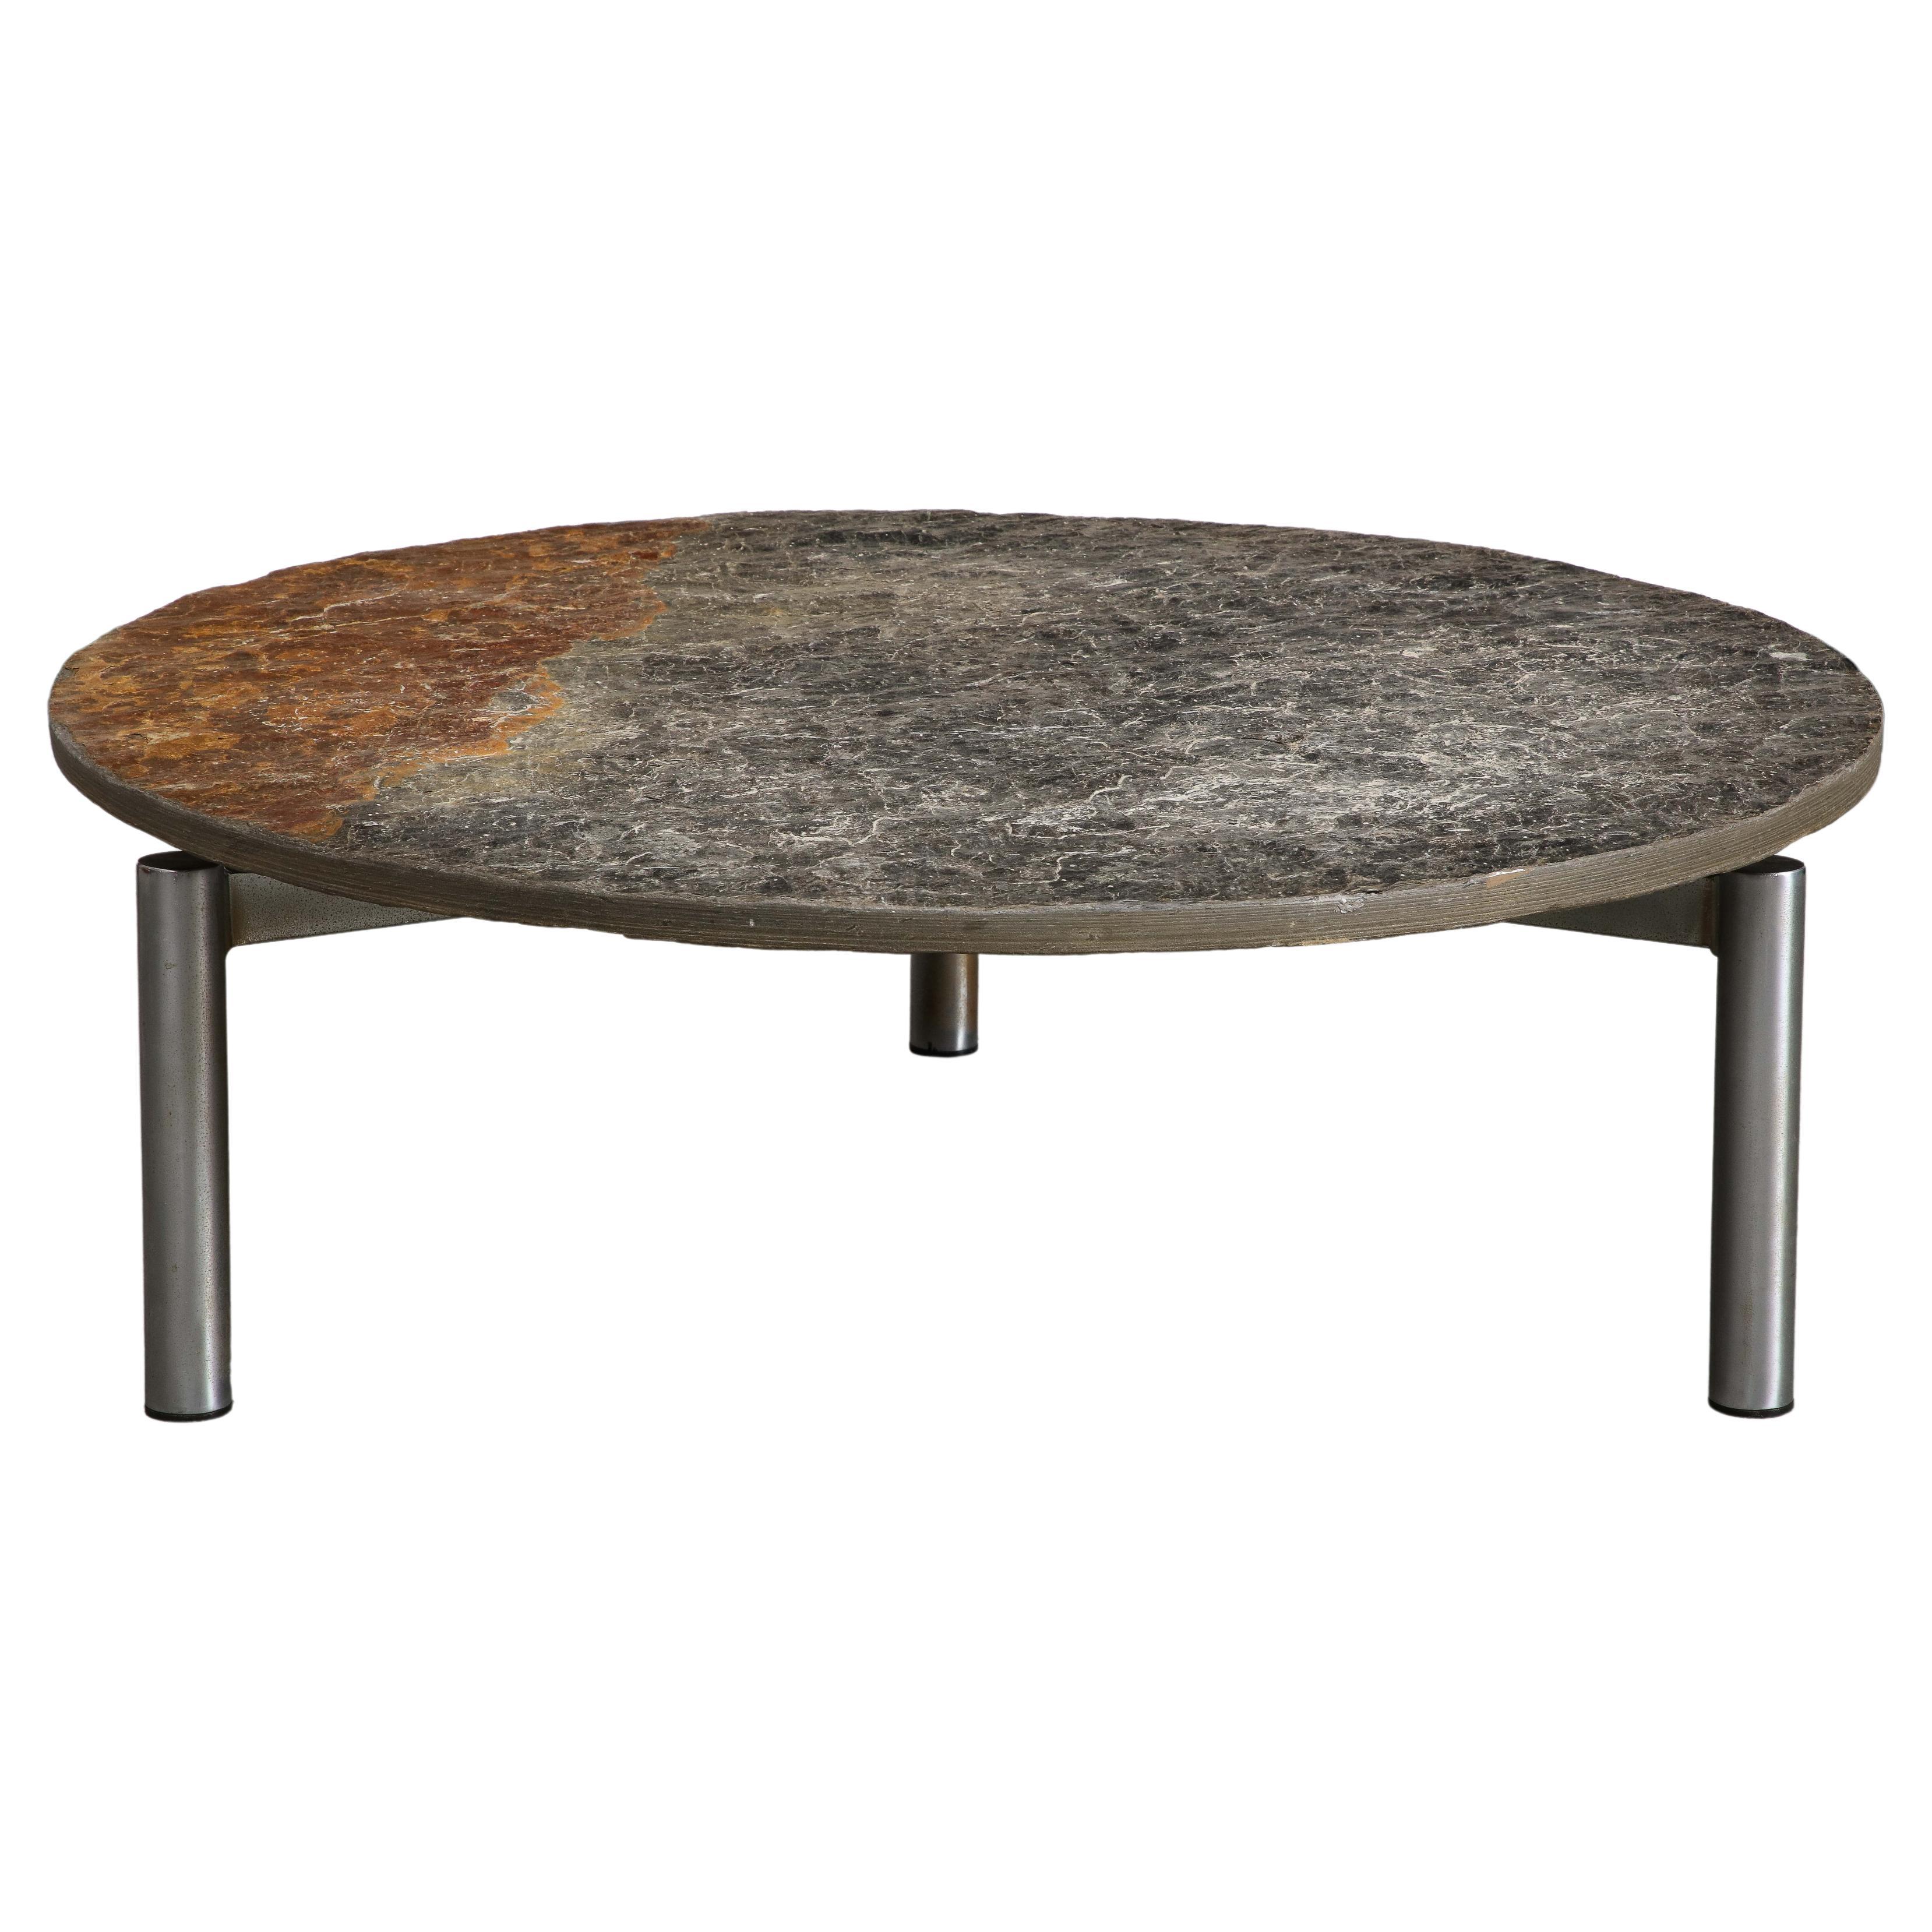 French Midcentury Chromed Steel Coffee Table with Round Natural Slate Top For Sale